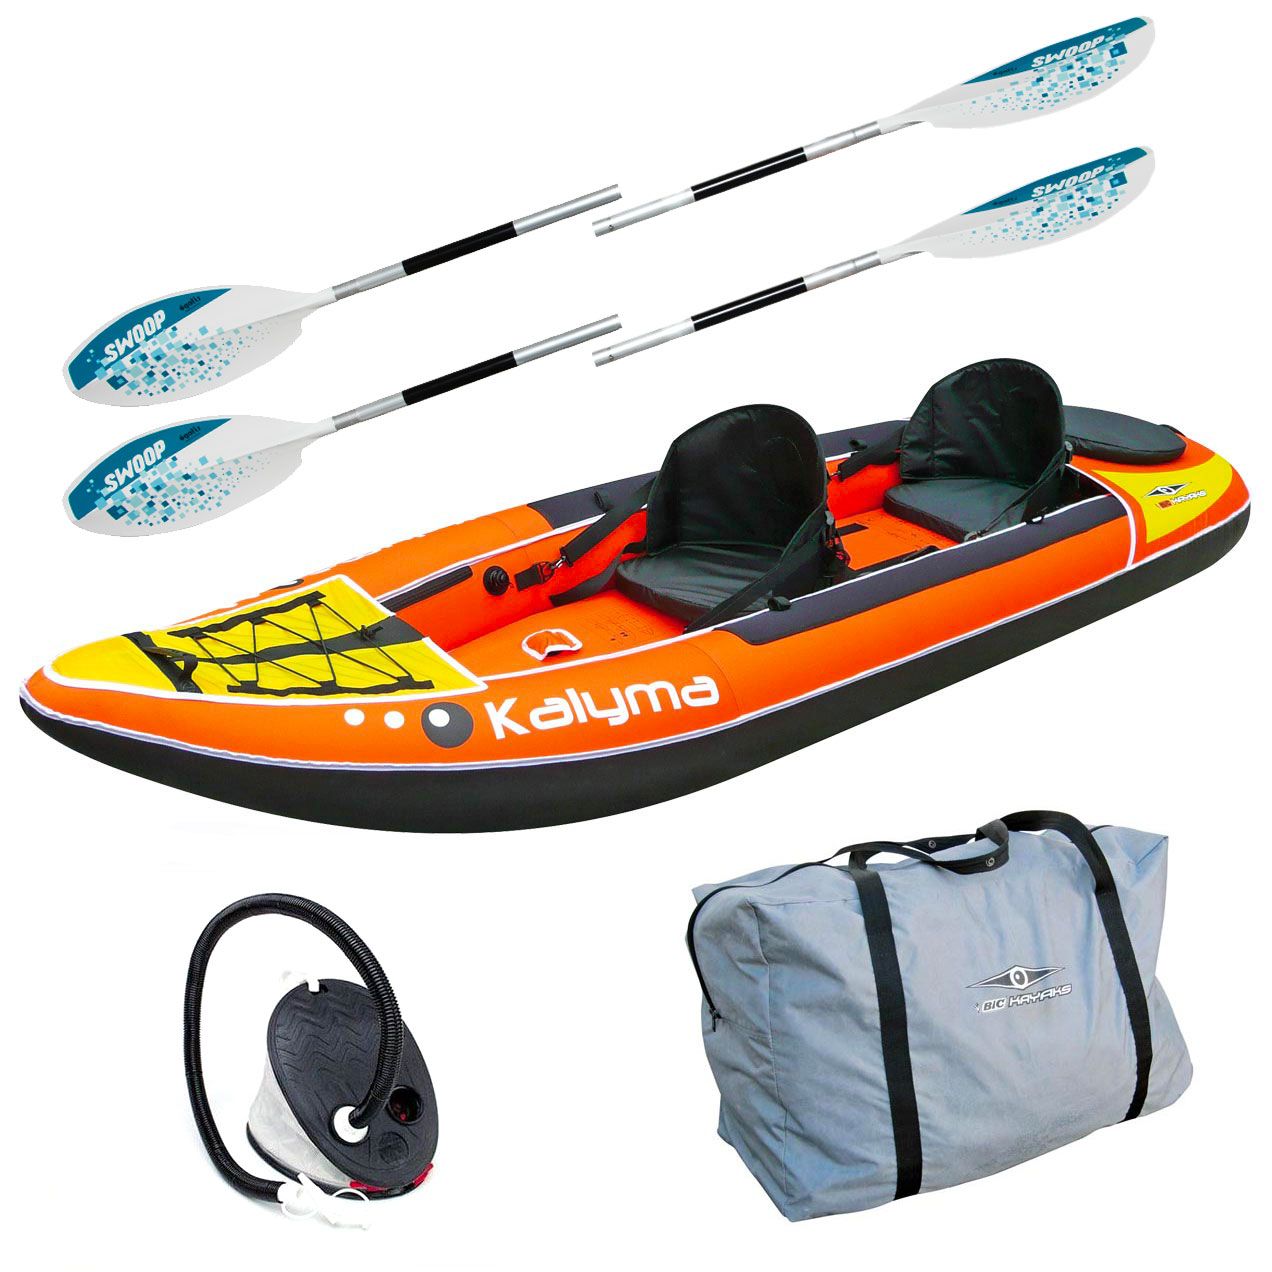 Pack kayak gonflable Kalyma duo + 2 pagaies 